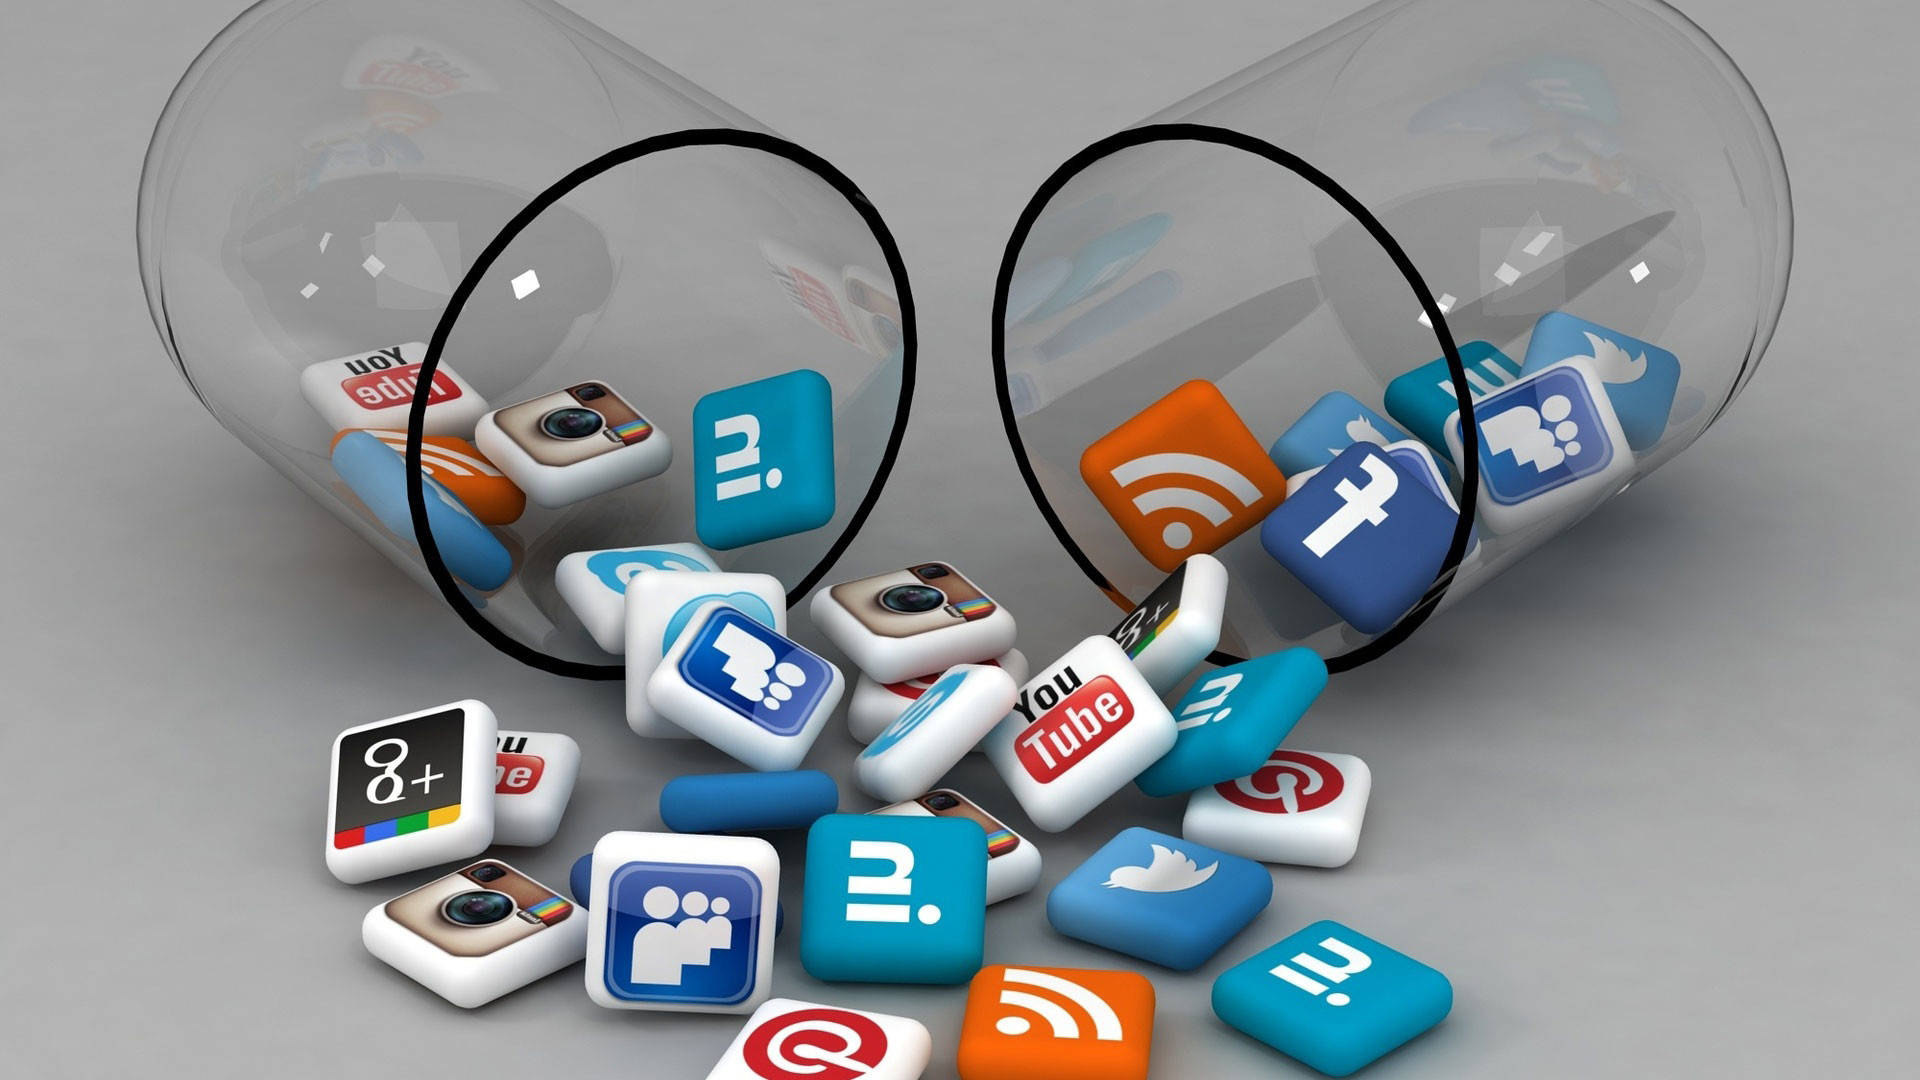 Social Media Icons Spilling Out Of Jar